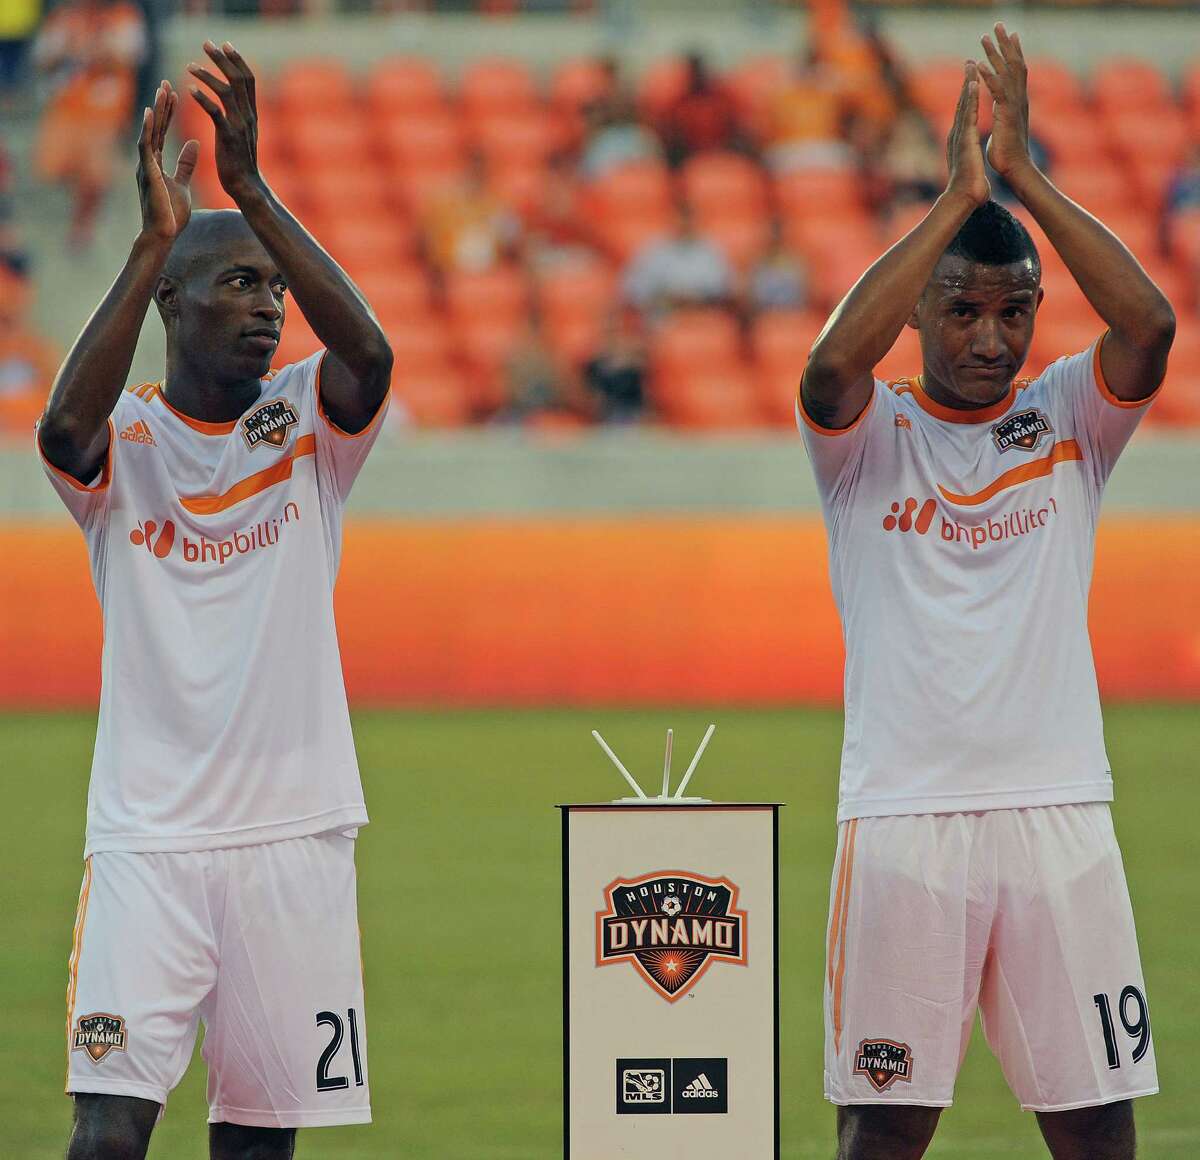 New Houston Dynamo players DaMarcus Beasley, left, and Luis Garrido acknowledge the crowd after being introduced before the BBVA Compass Dynamo Charities Cup against Aston Villa, Saturday, July 26, 2014, at BBVA Compass Stadium in Houston.